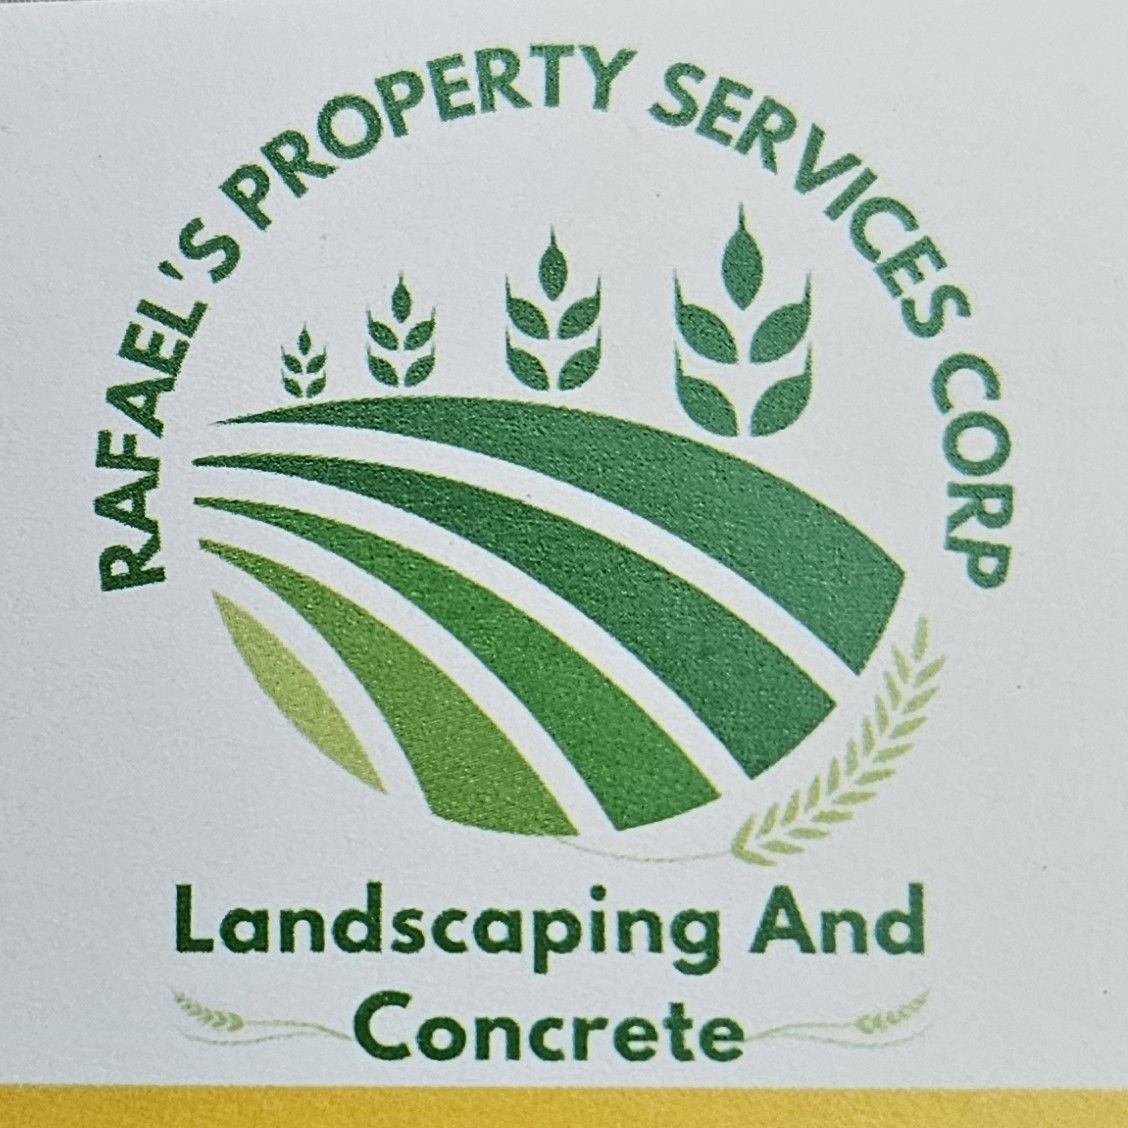 Rafael's Property Services Corp, 2080 Brendla Rd, Clearwater, 33755